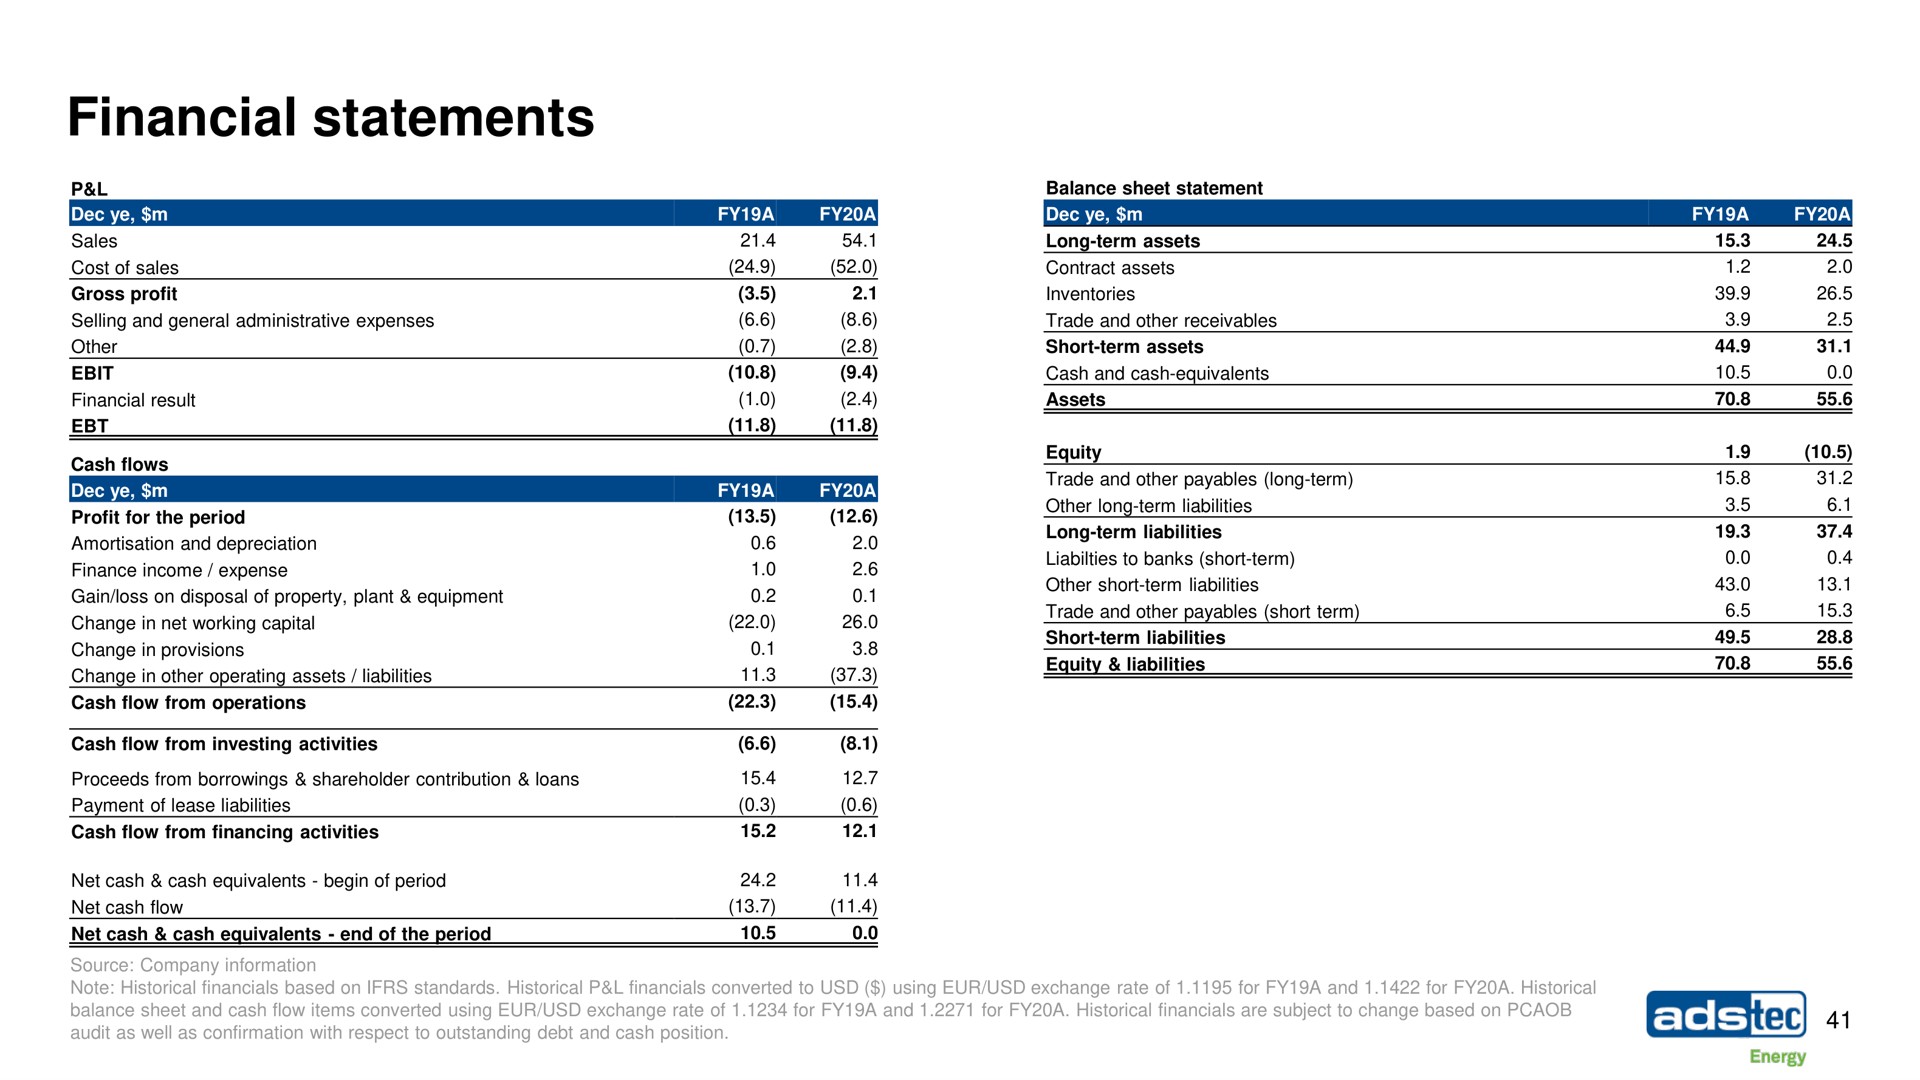 financial statements | ads-tec Energy